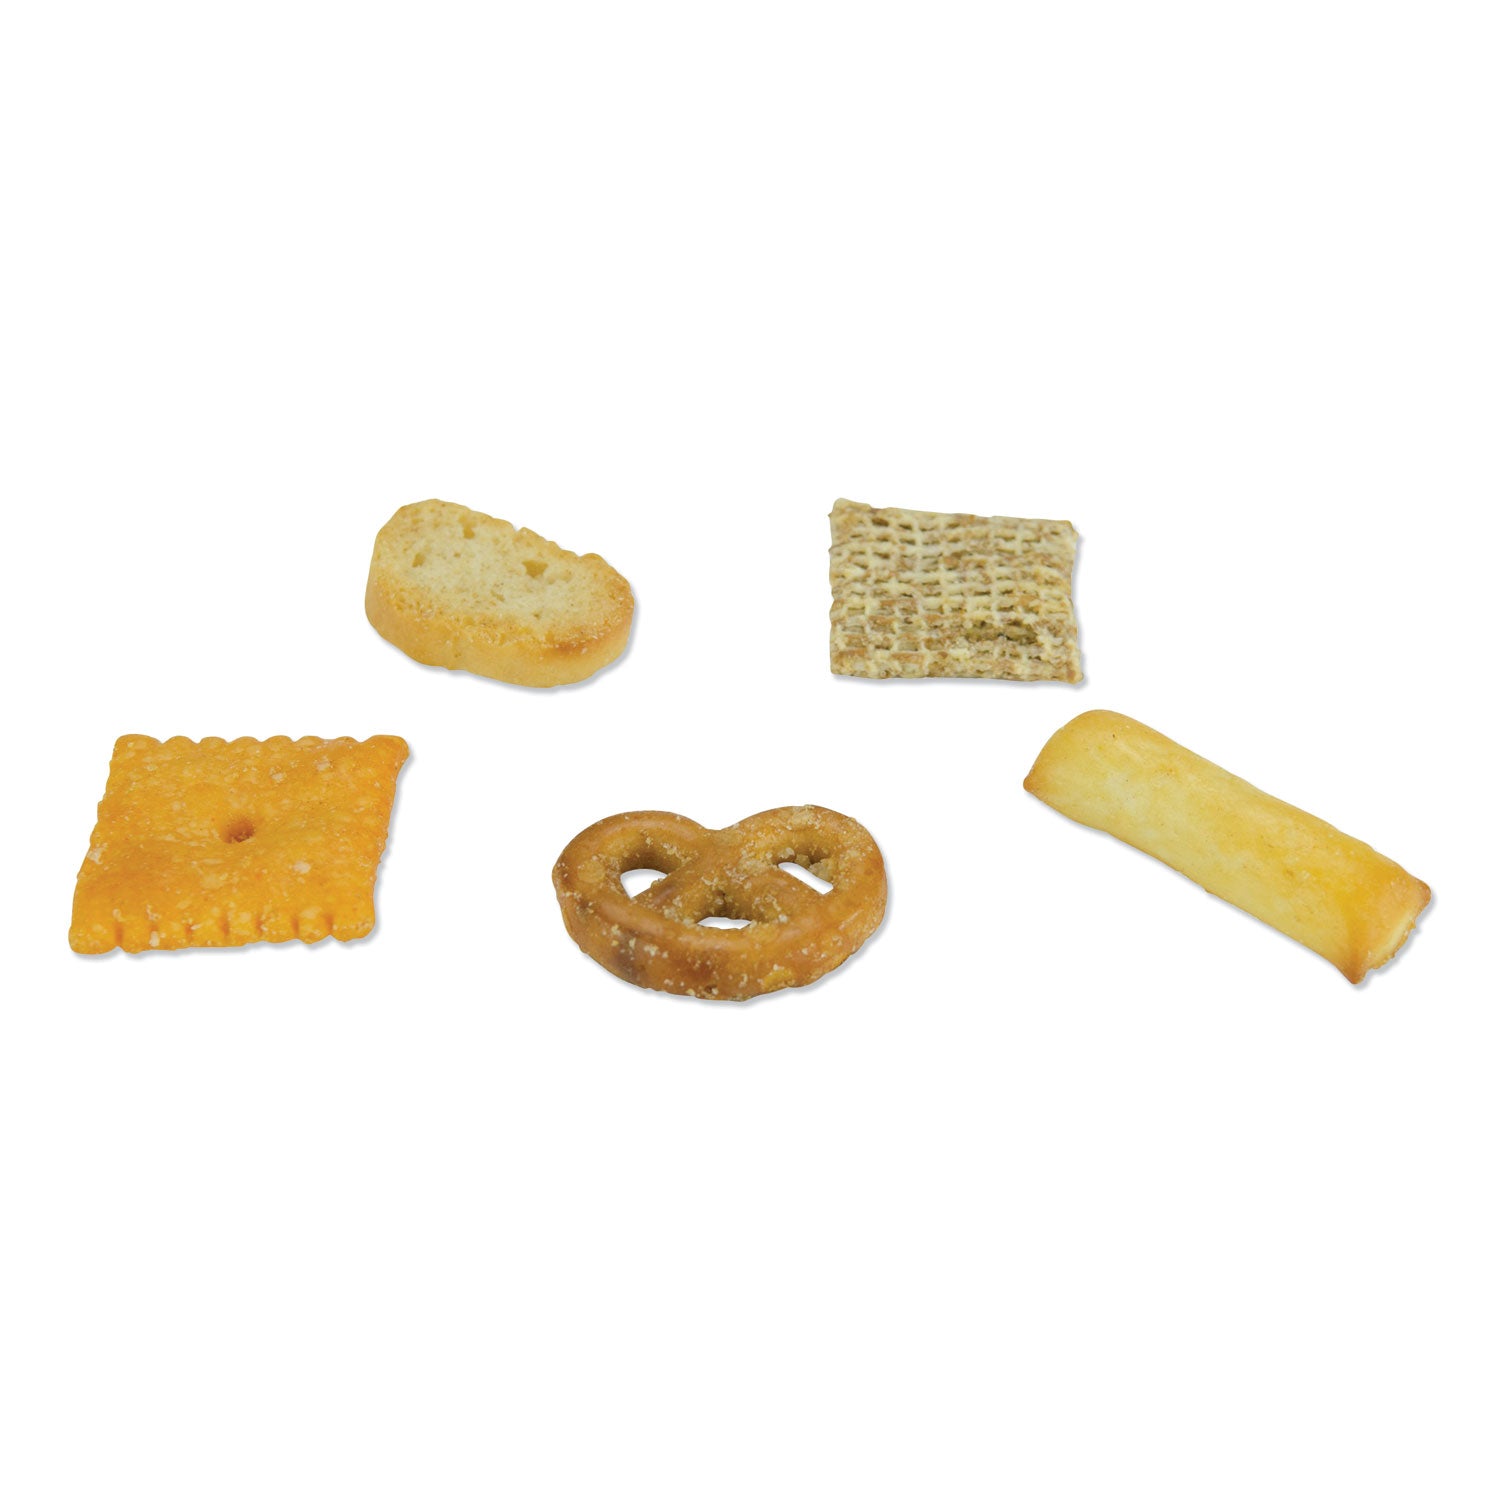 cheez-it-baked-snack-mix-classic-cheese-45-oz-bag-6-pack_keb57715 - 4